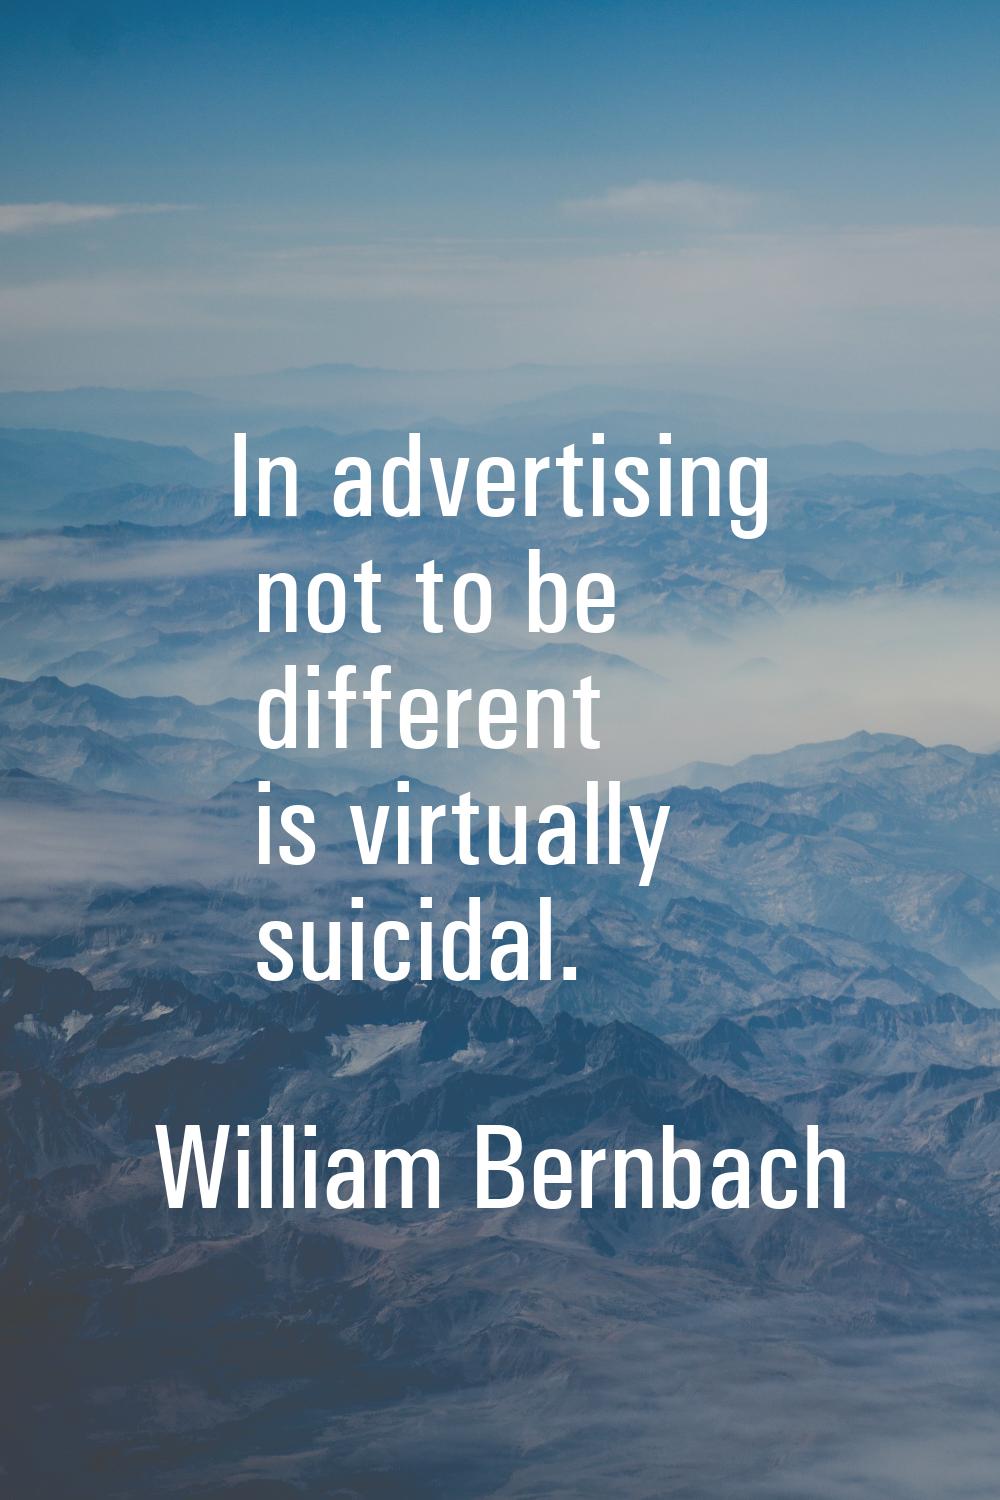 In advertising not to be different is virtually suicidal.